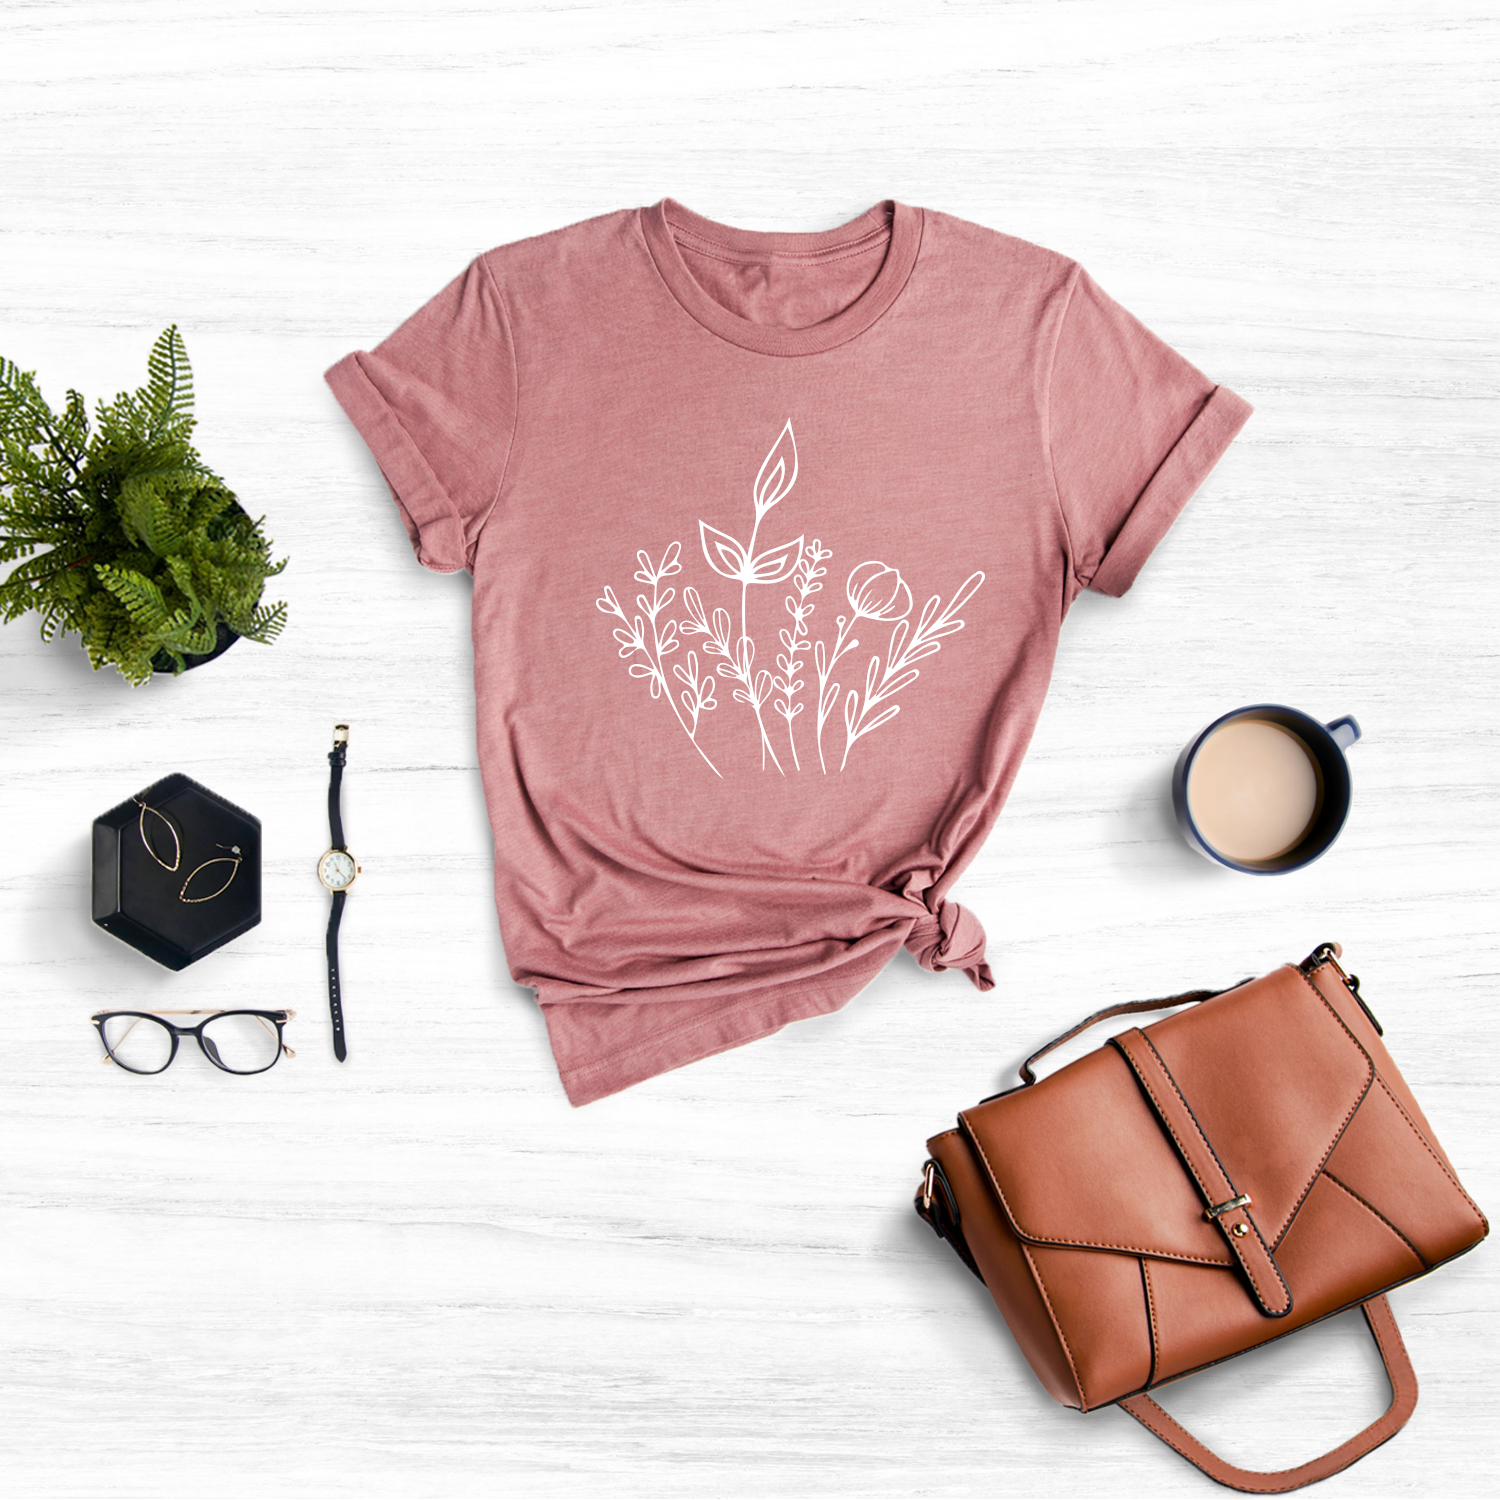 Embrace the beauty of nature with this vibrant "Wild Flowers" t-shirt featuring a colorful wildflower design